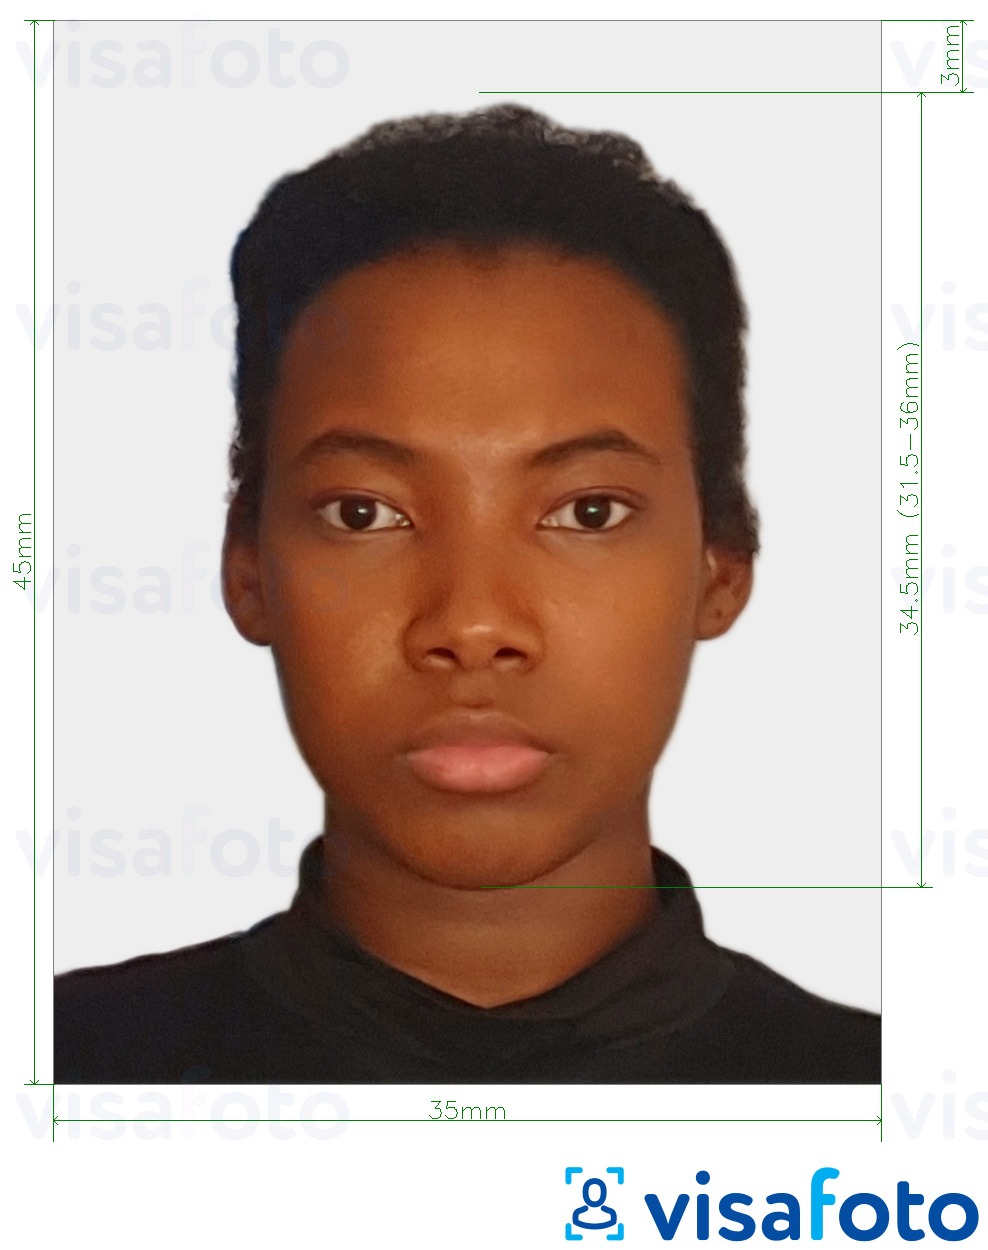 Example of photo for South Africa Passport 35x45 mm (3.5x4.5 cm) with exact size specification